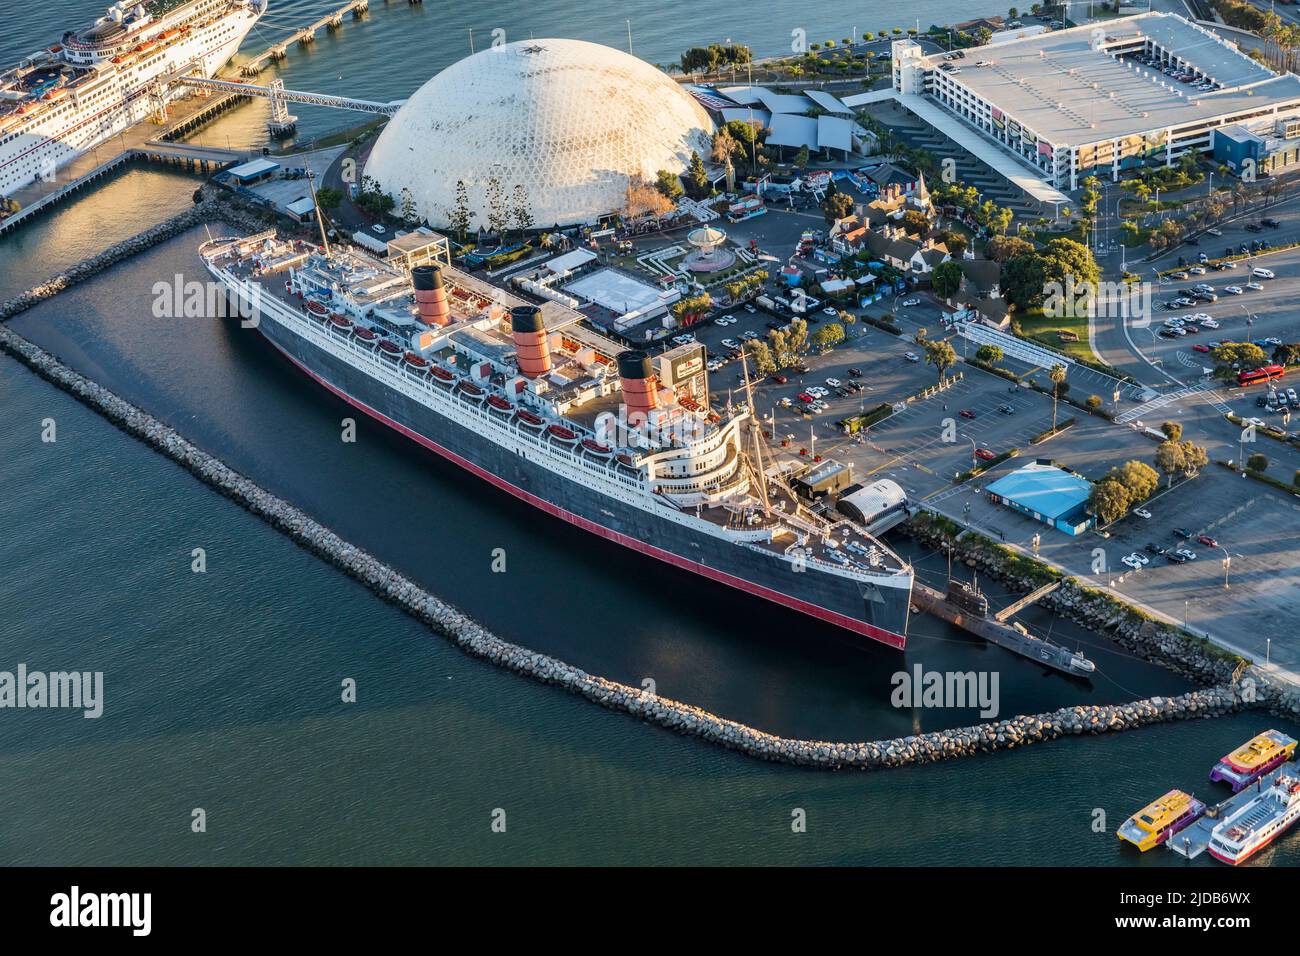 RMS Queen Mary, now a hotel ship and tourist attraction at Long Beach, California.  Dome is former home of Howard Hughes' Spruce Goose. Stock Photo